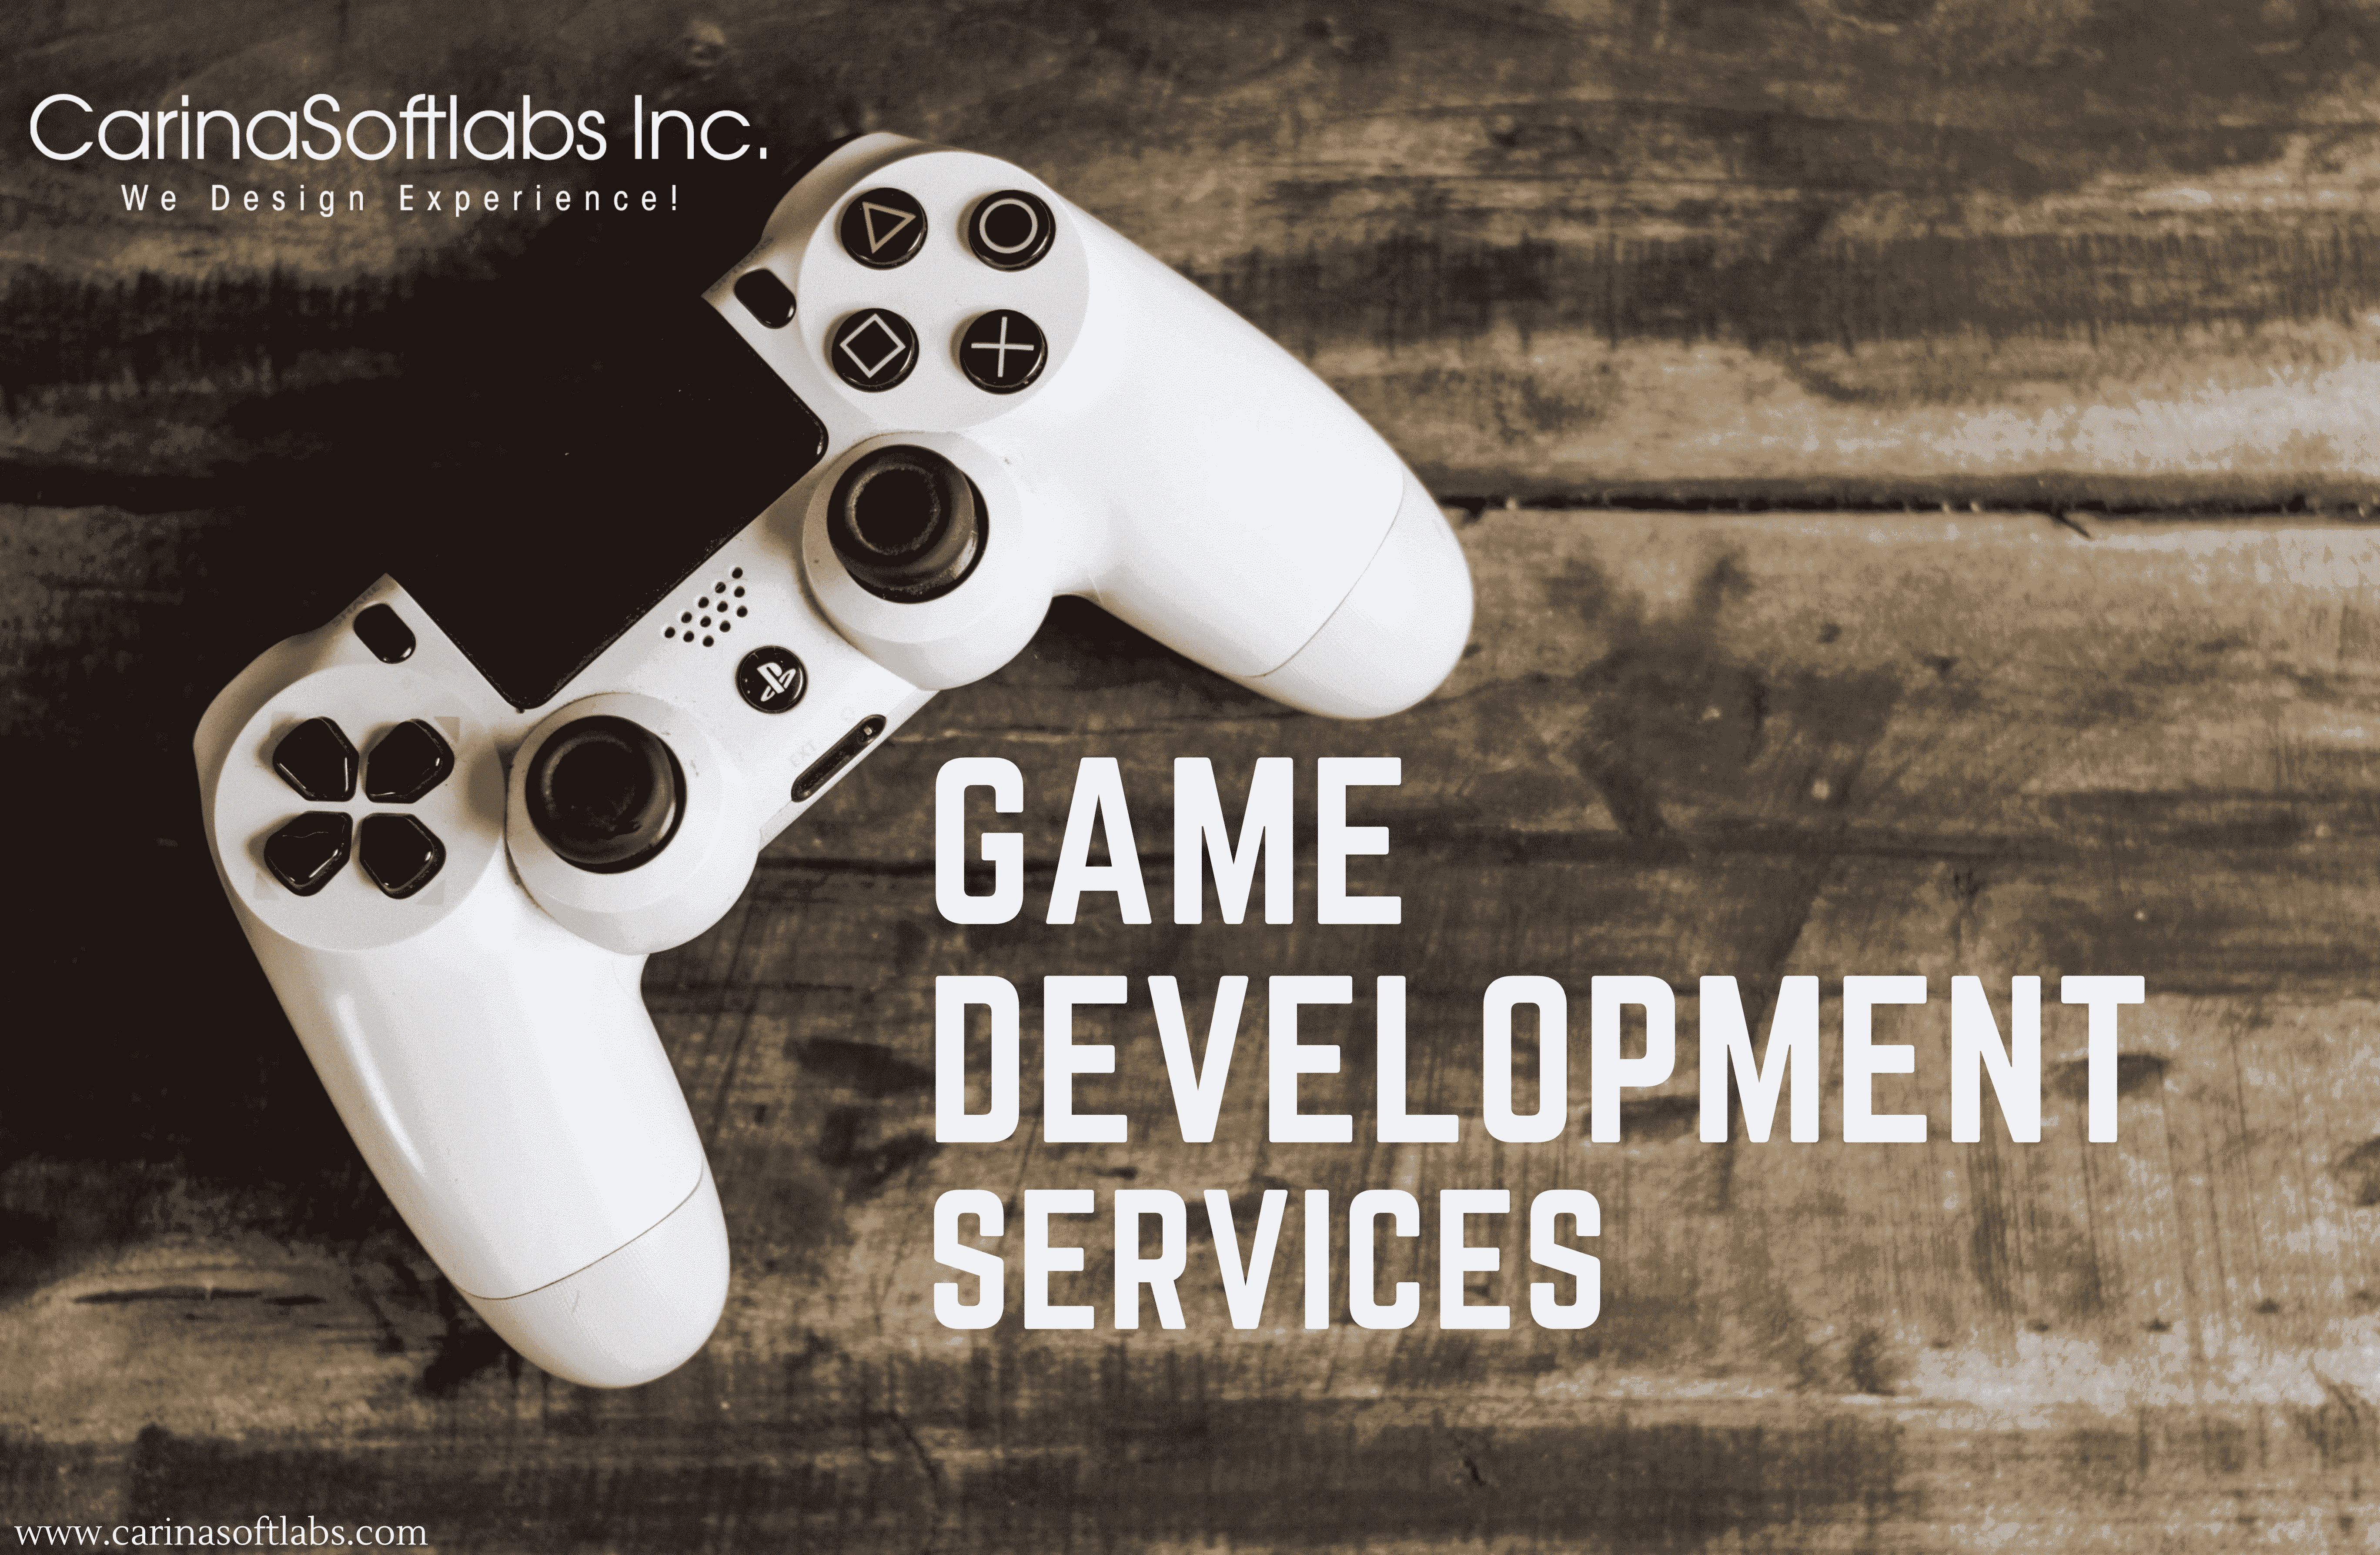 Best Unity 3D Game Development Services In India | Carina Softlabs Inc.